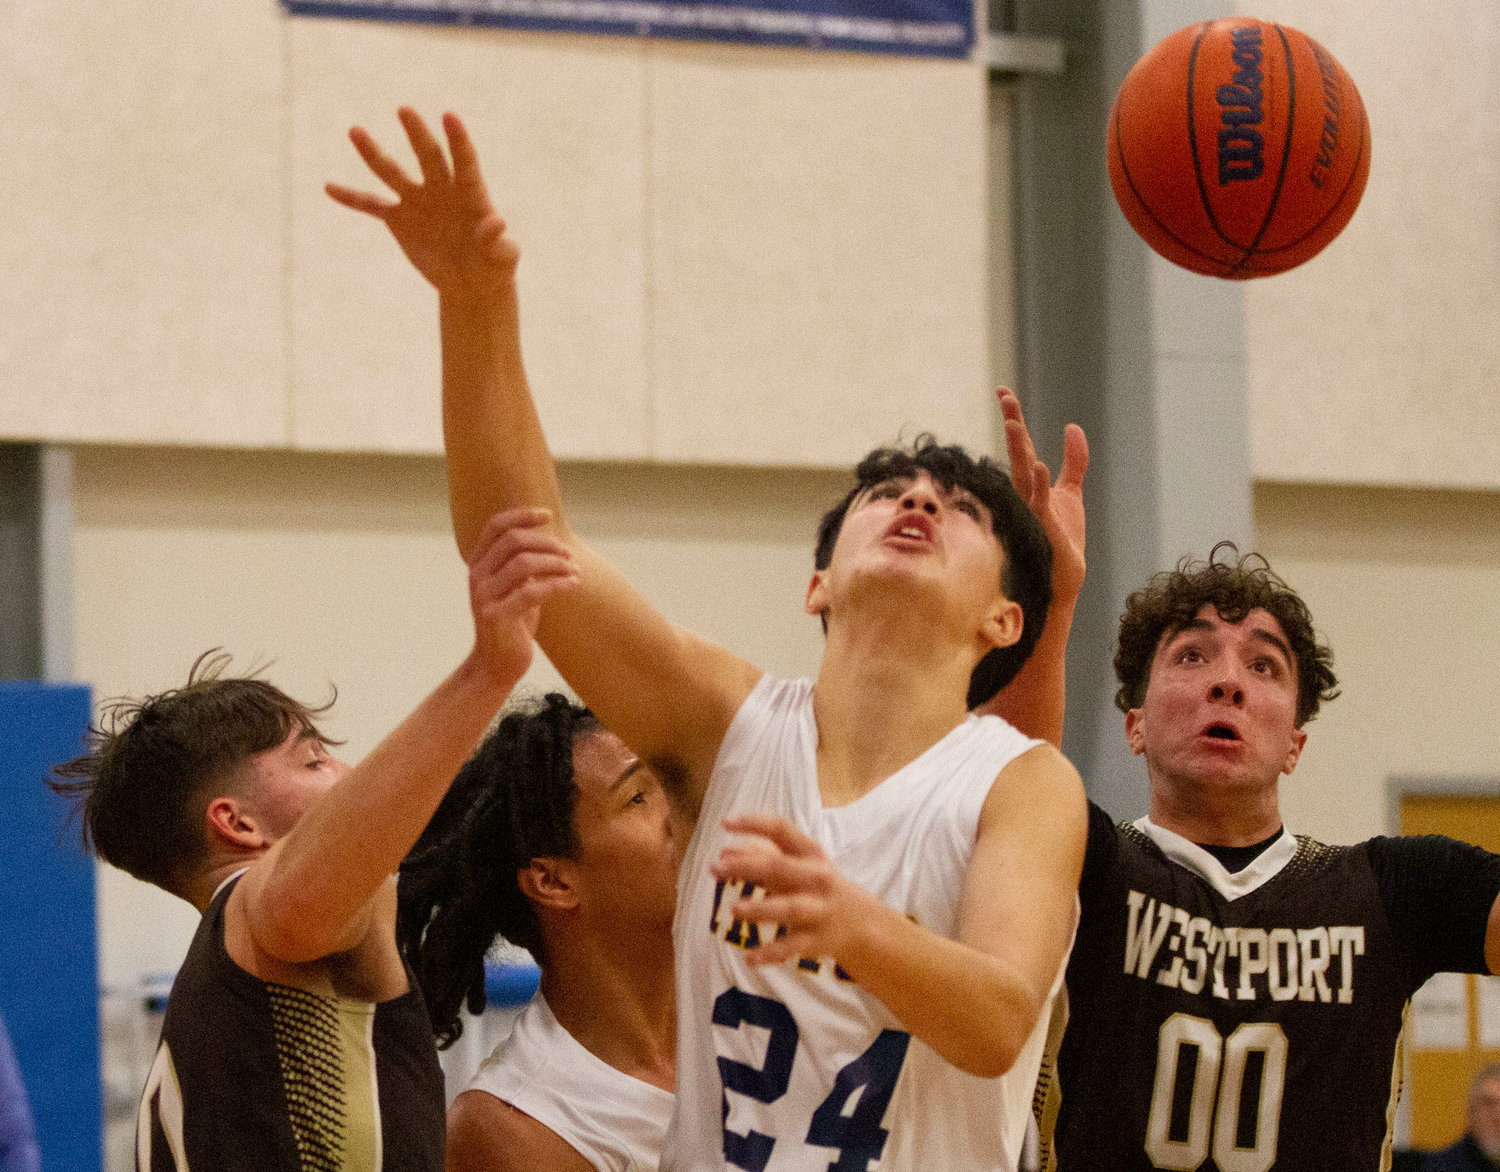 Cam Leary (left) and Max Morotti fight for an offensive rebound in the first quarter.